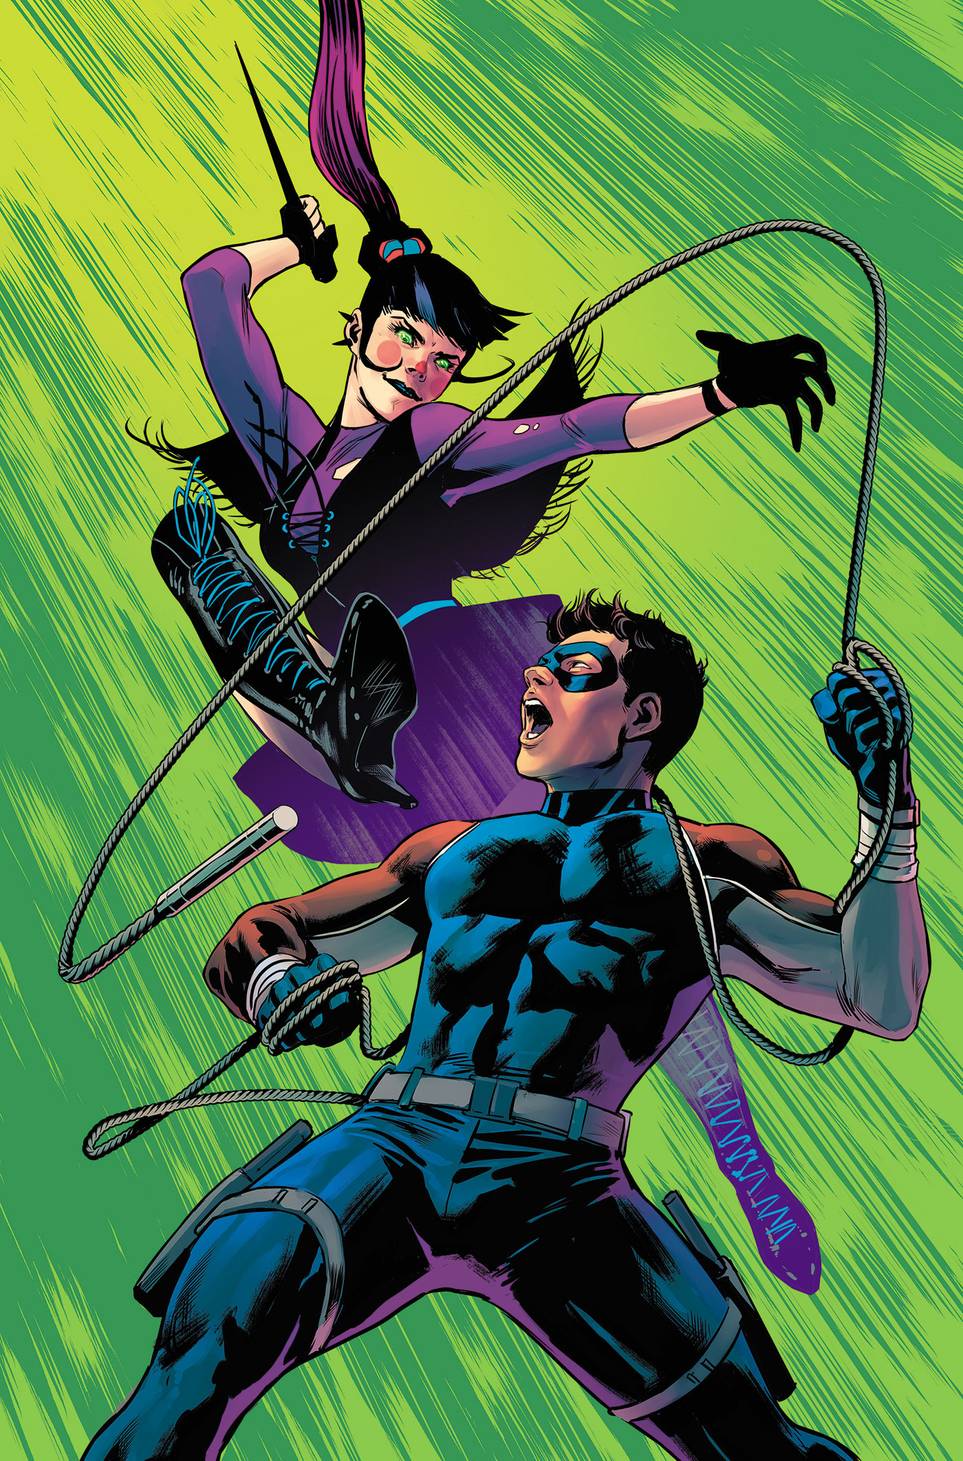 https://static0.cbrimages.com/wordpress/wp-content/uploads/2020/02/Nightwing72-cover-color-SOLICITSONLY-FINAL.jpg?q=50&fit=crop&w=963&h=1461&dpr=1.5